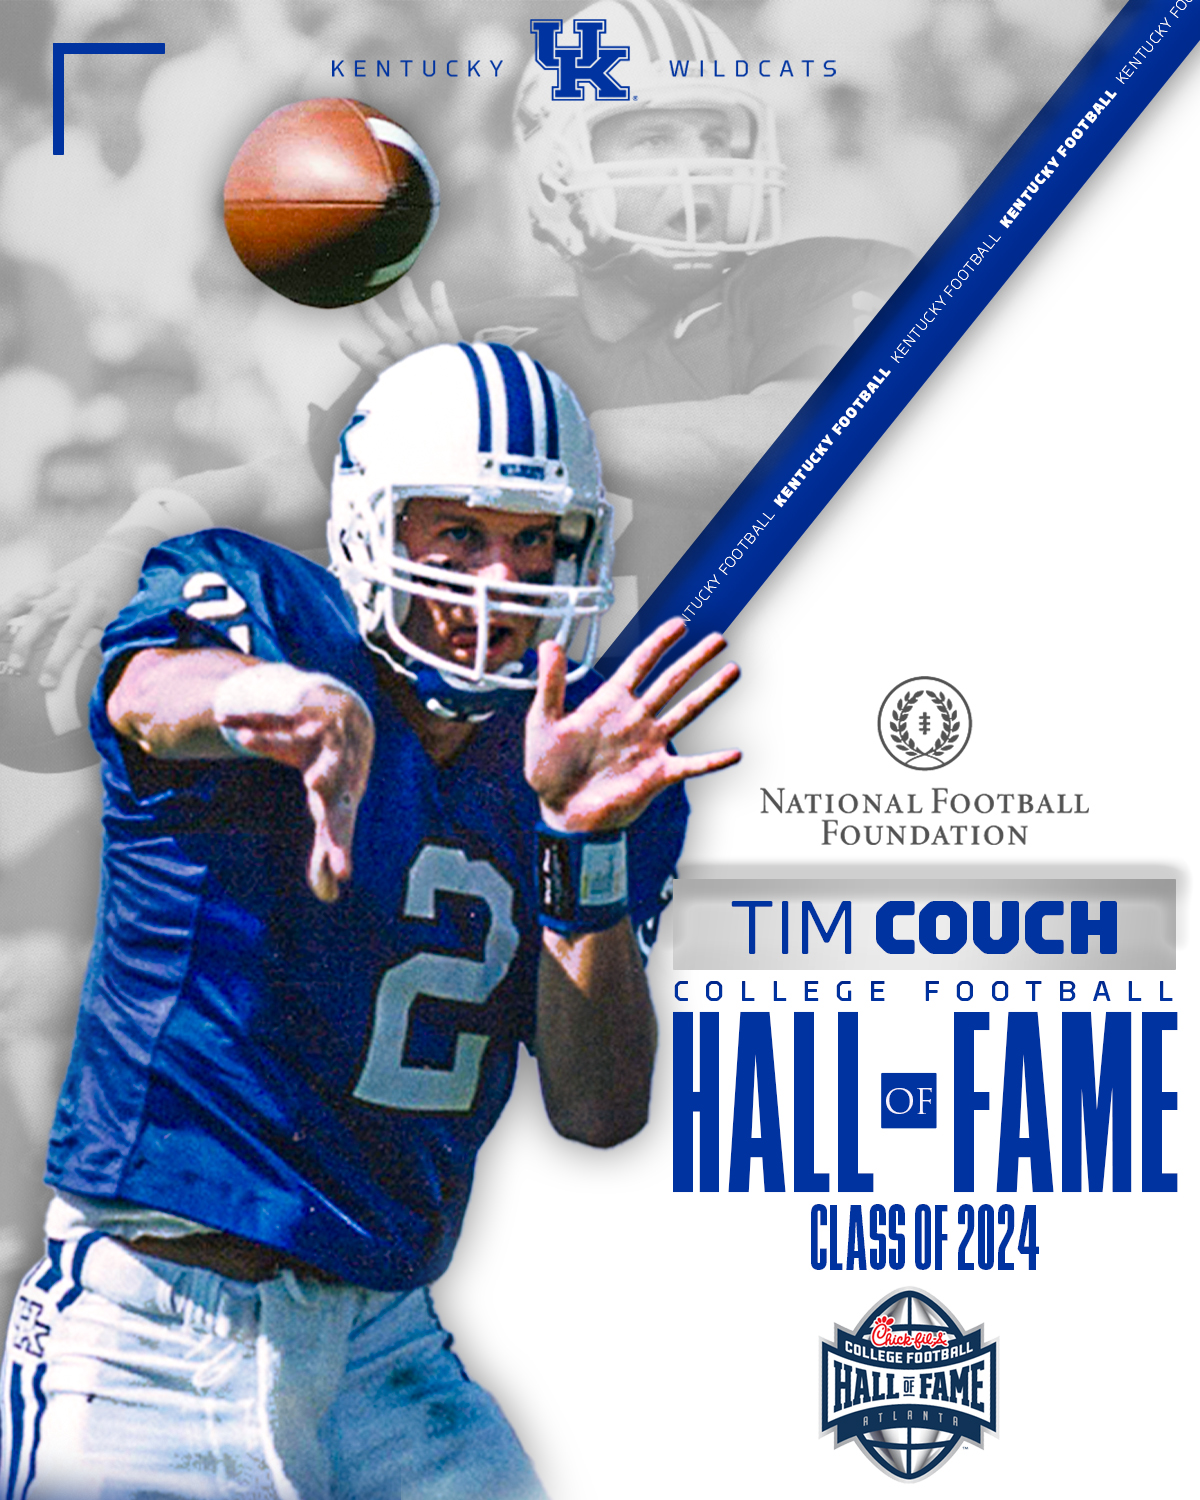 Tim Couch Elected to the College Football Hall of Fame